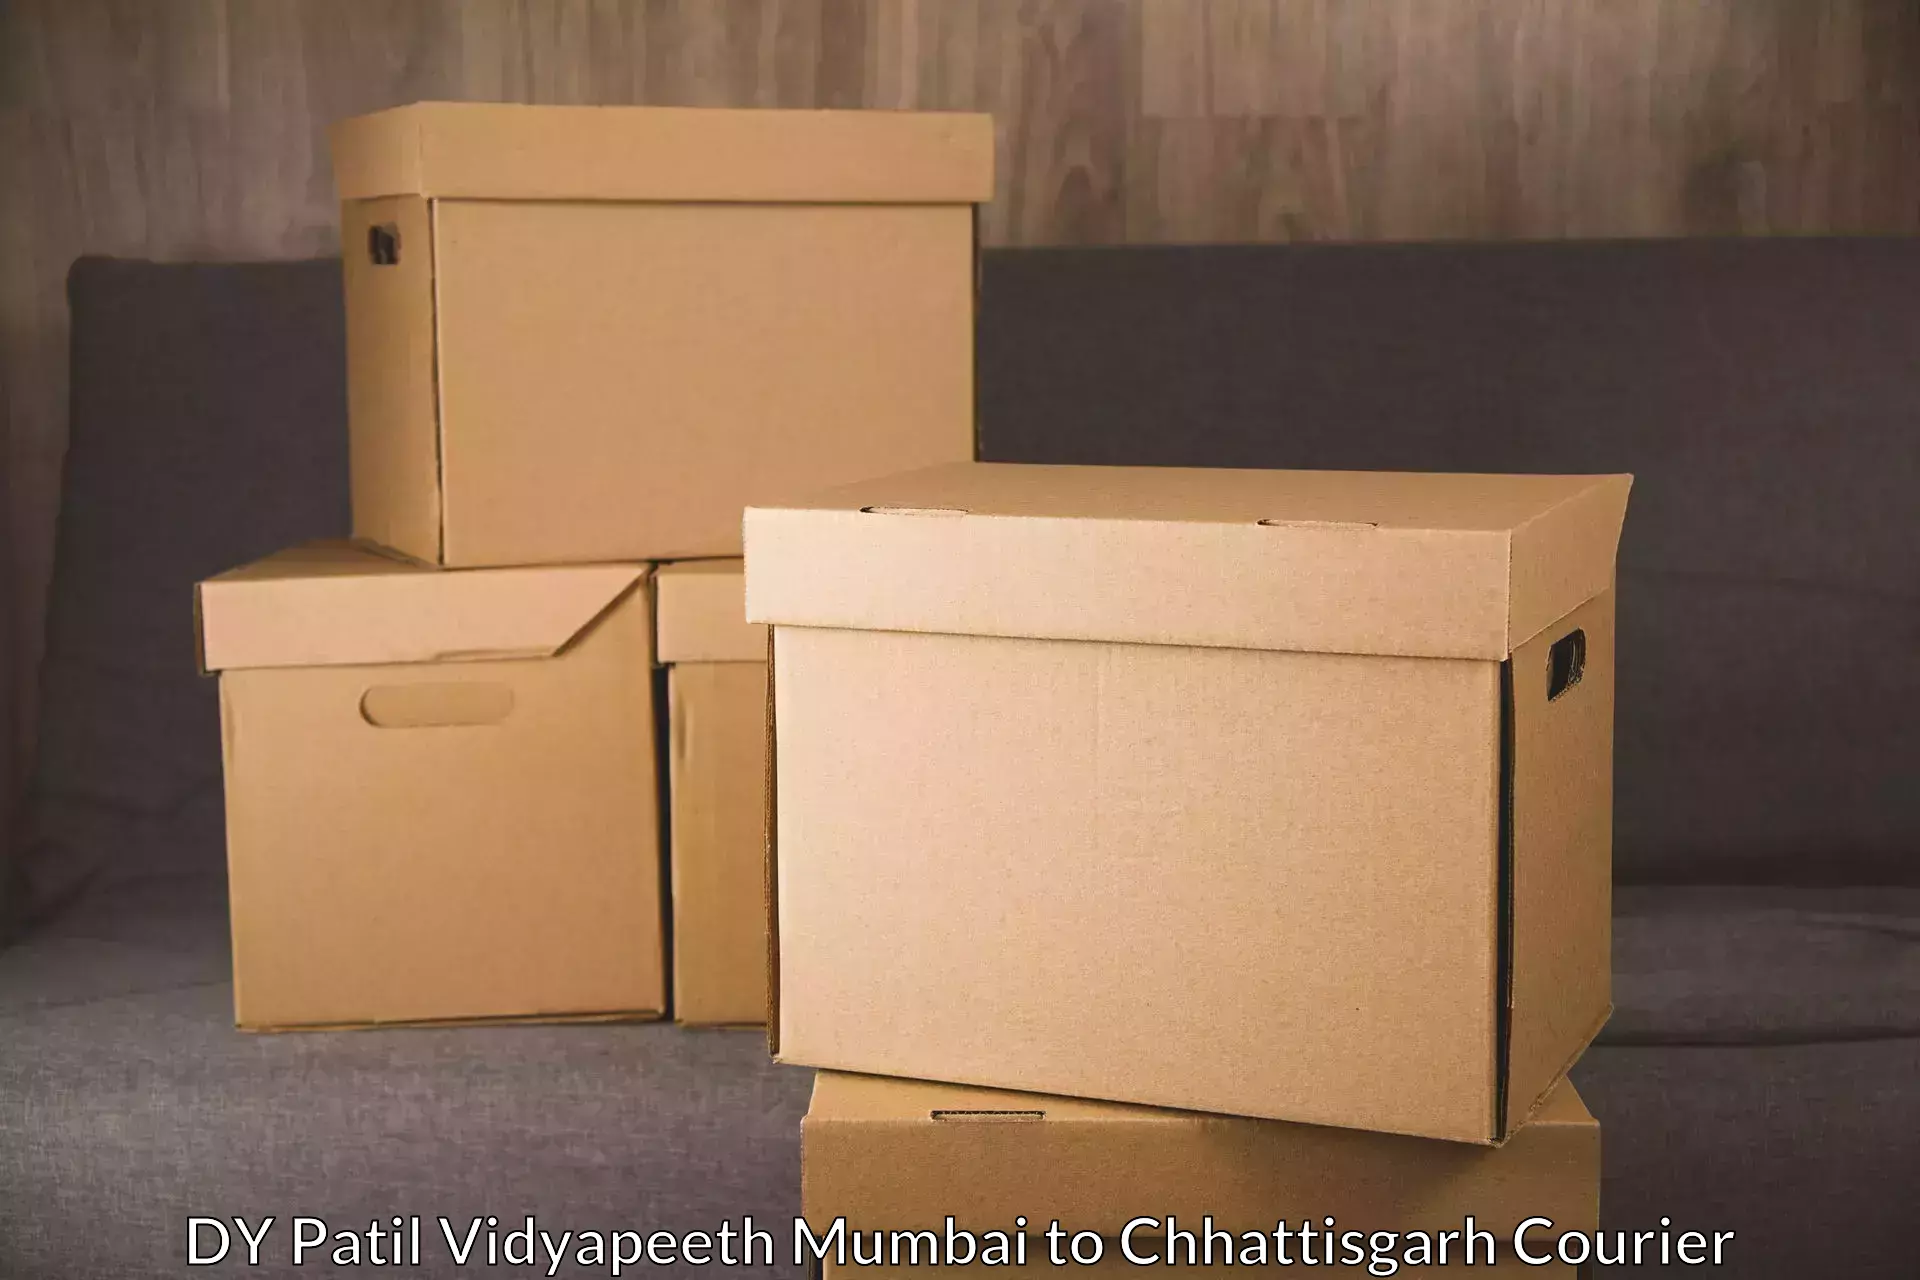 Professional courier handling in DY Patil Vidyapeeth Mumbai to Pendra